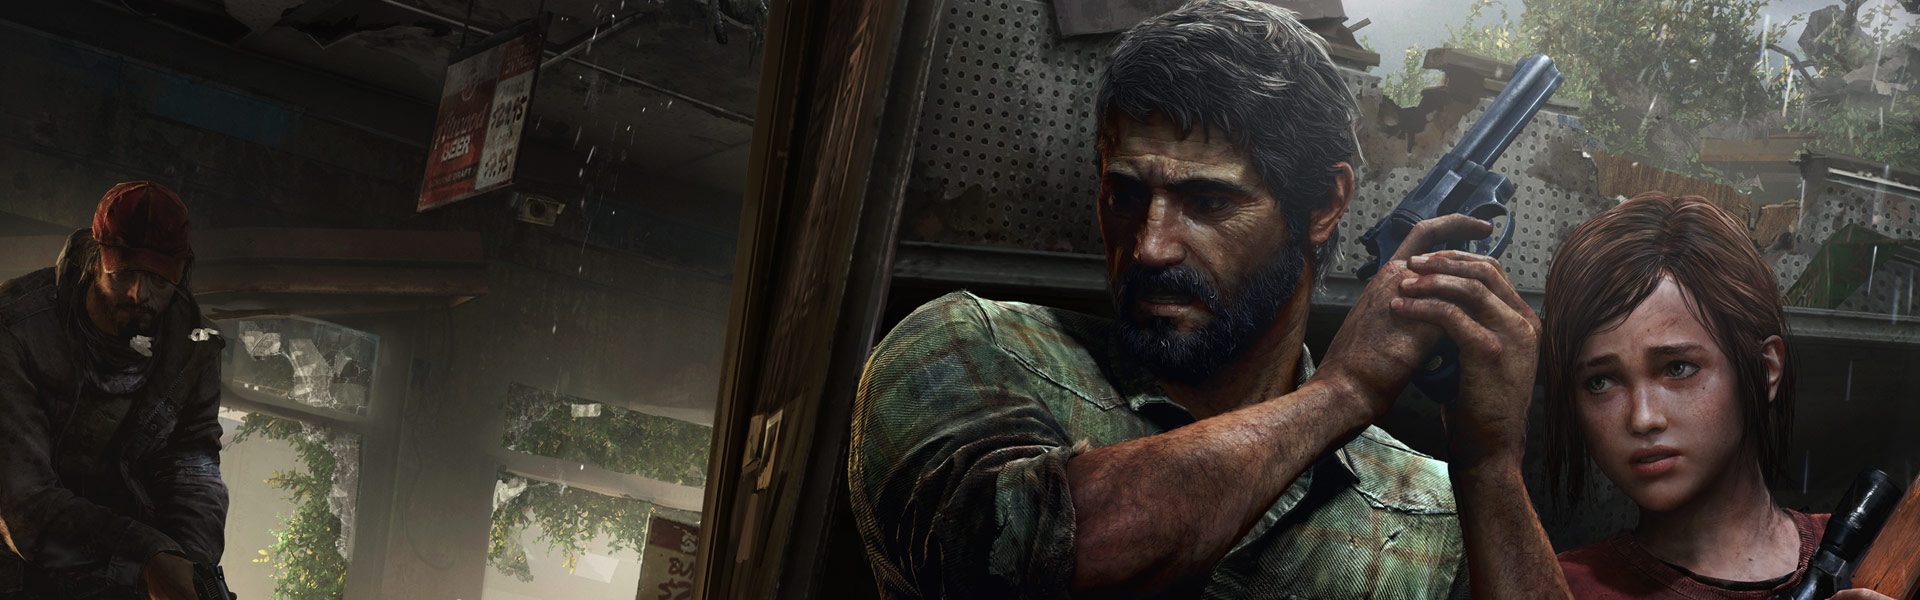 the last of us grounded download free